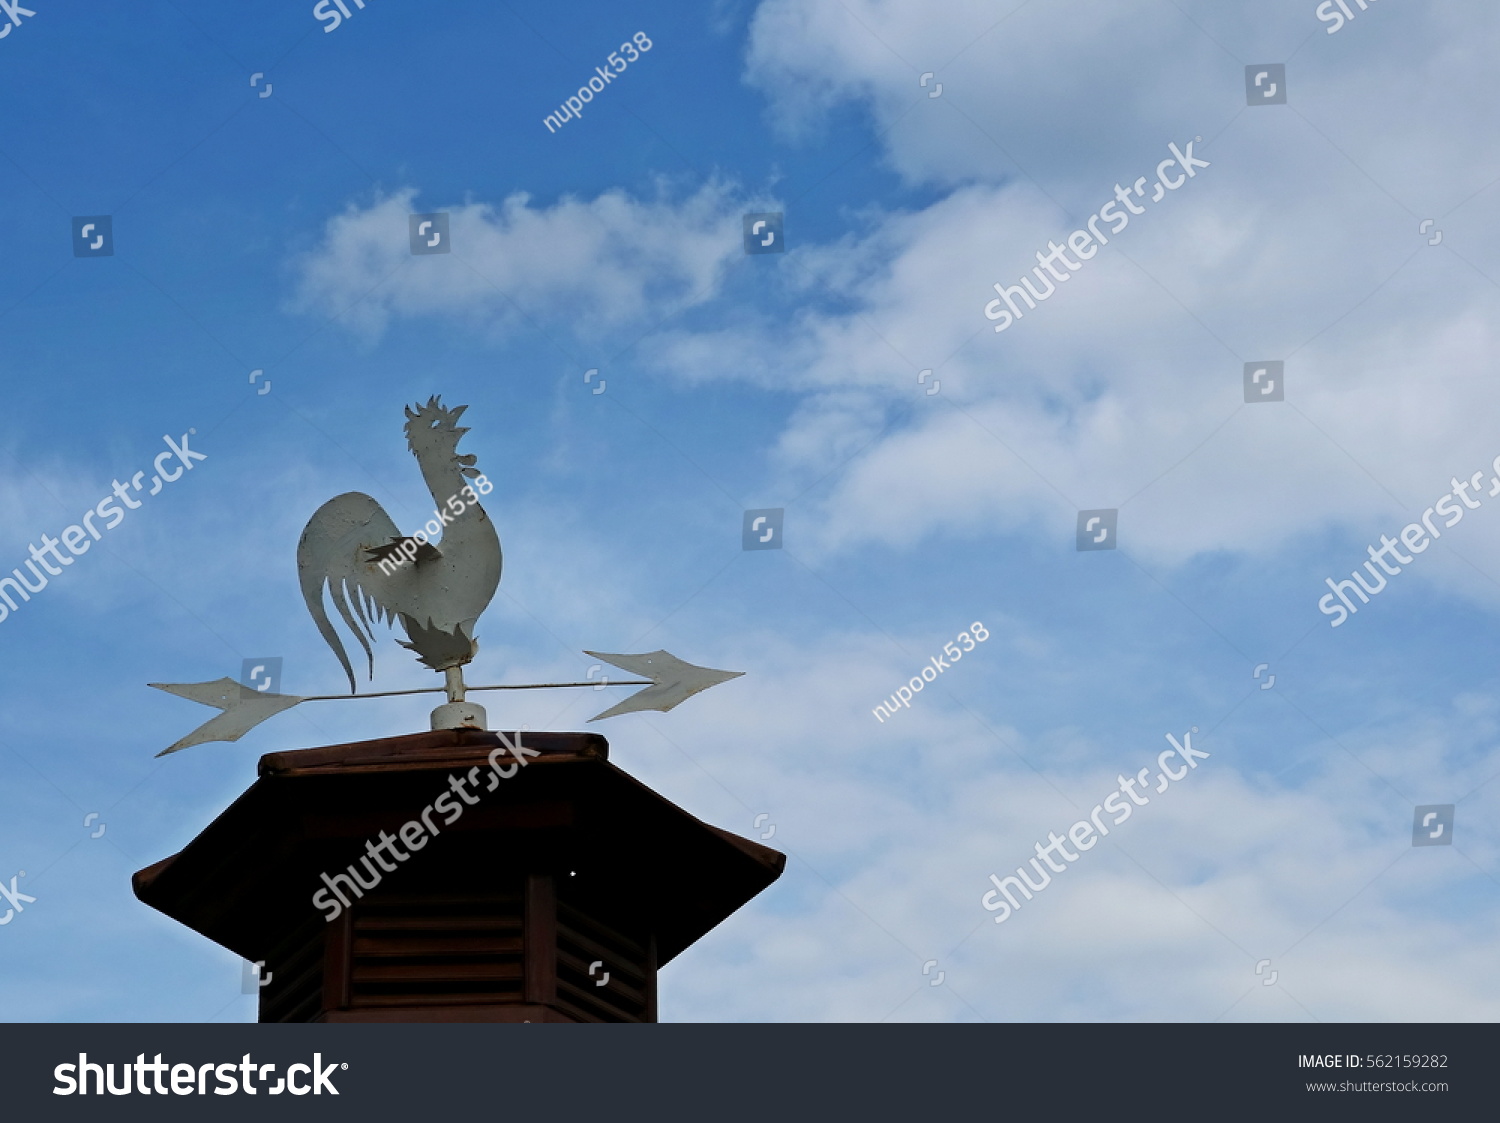 An old chicken metal weather vane, or weathercock on top roof with beautiful blue sky with white cloud and copy space #562159282